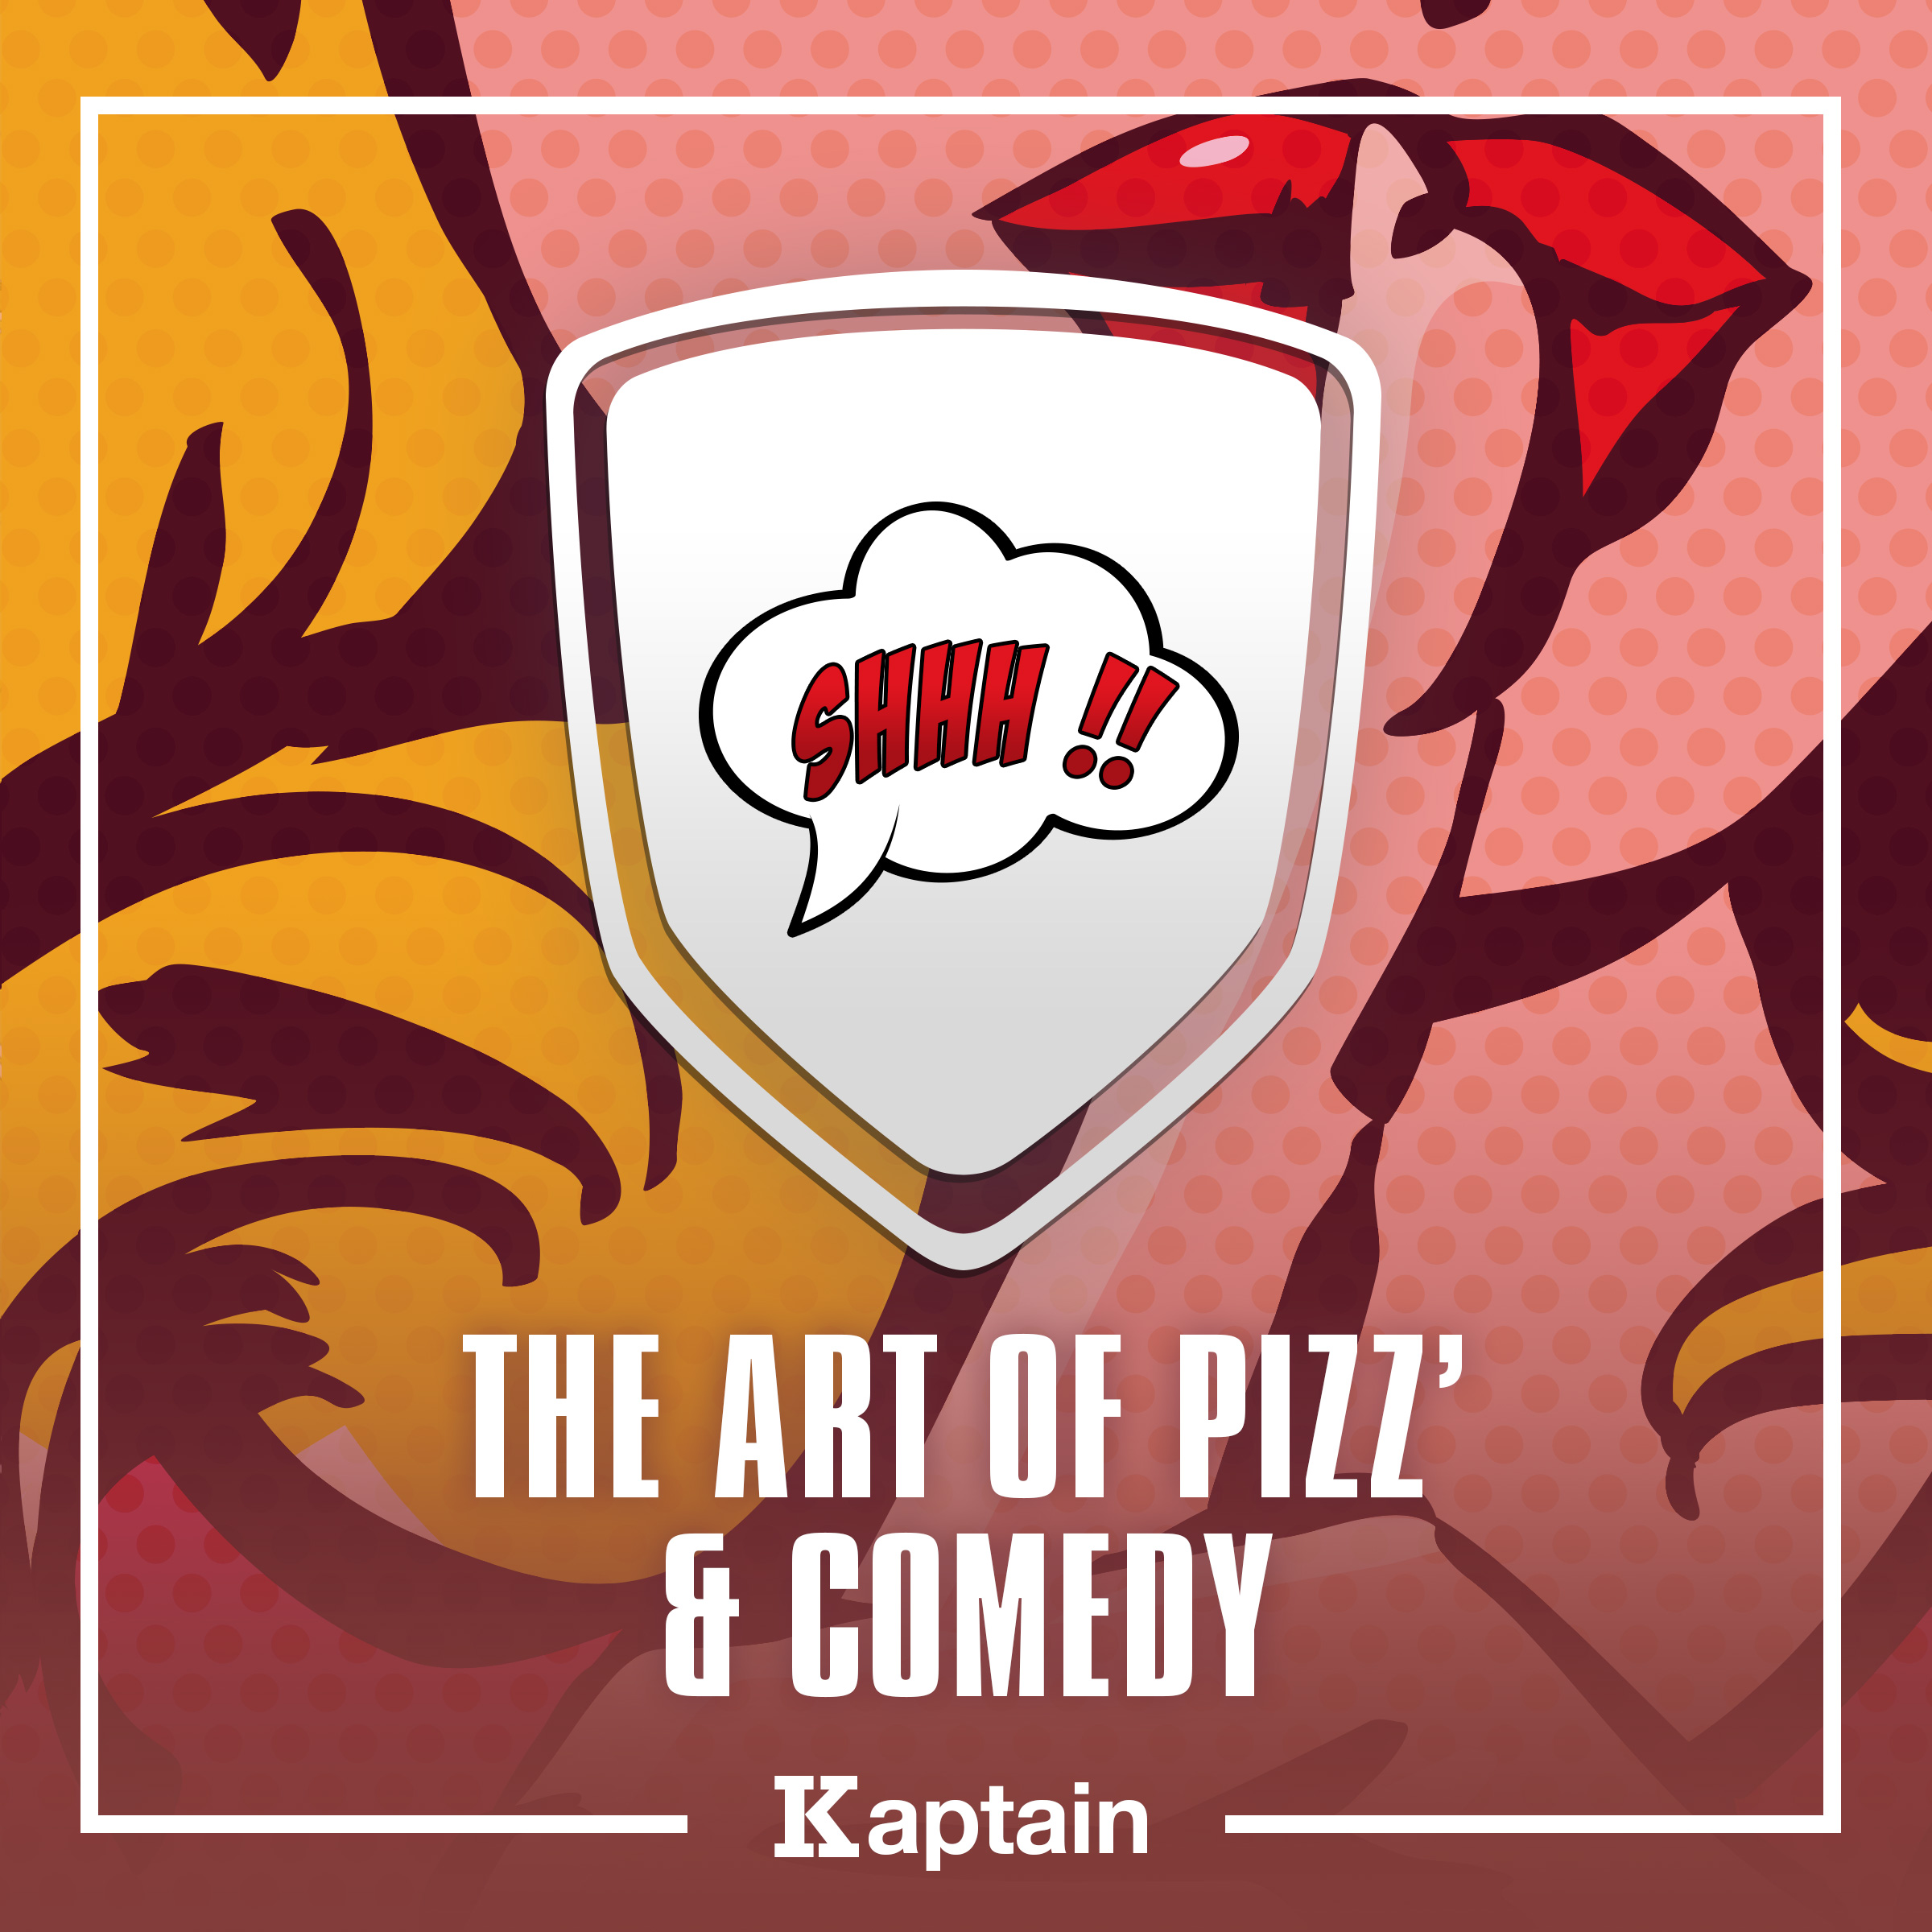 The Art Of Pizz & Comedy